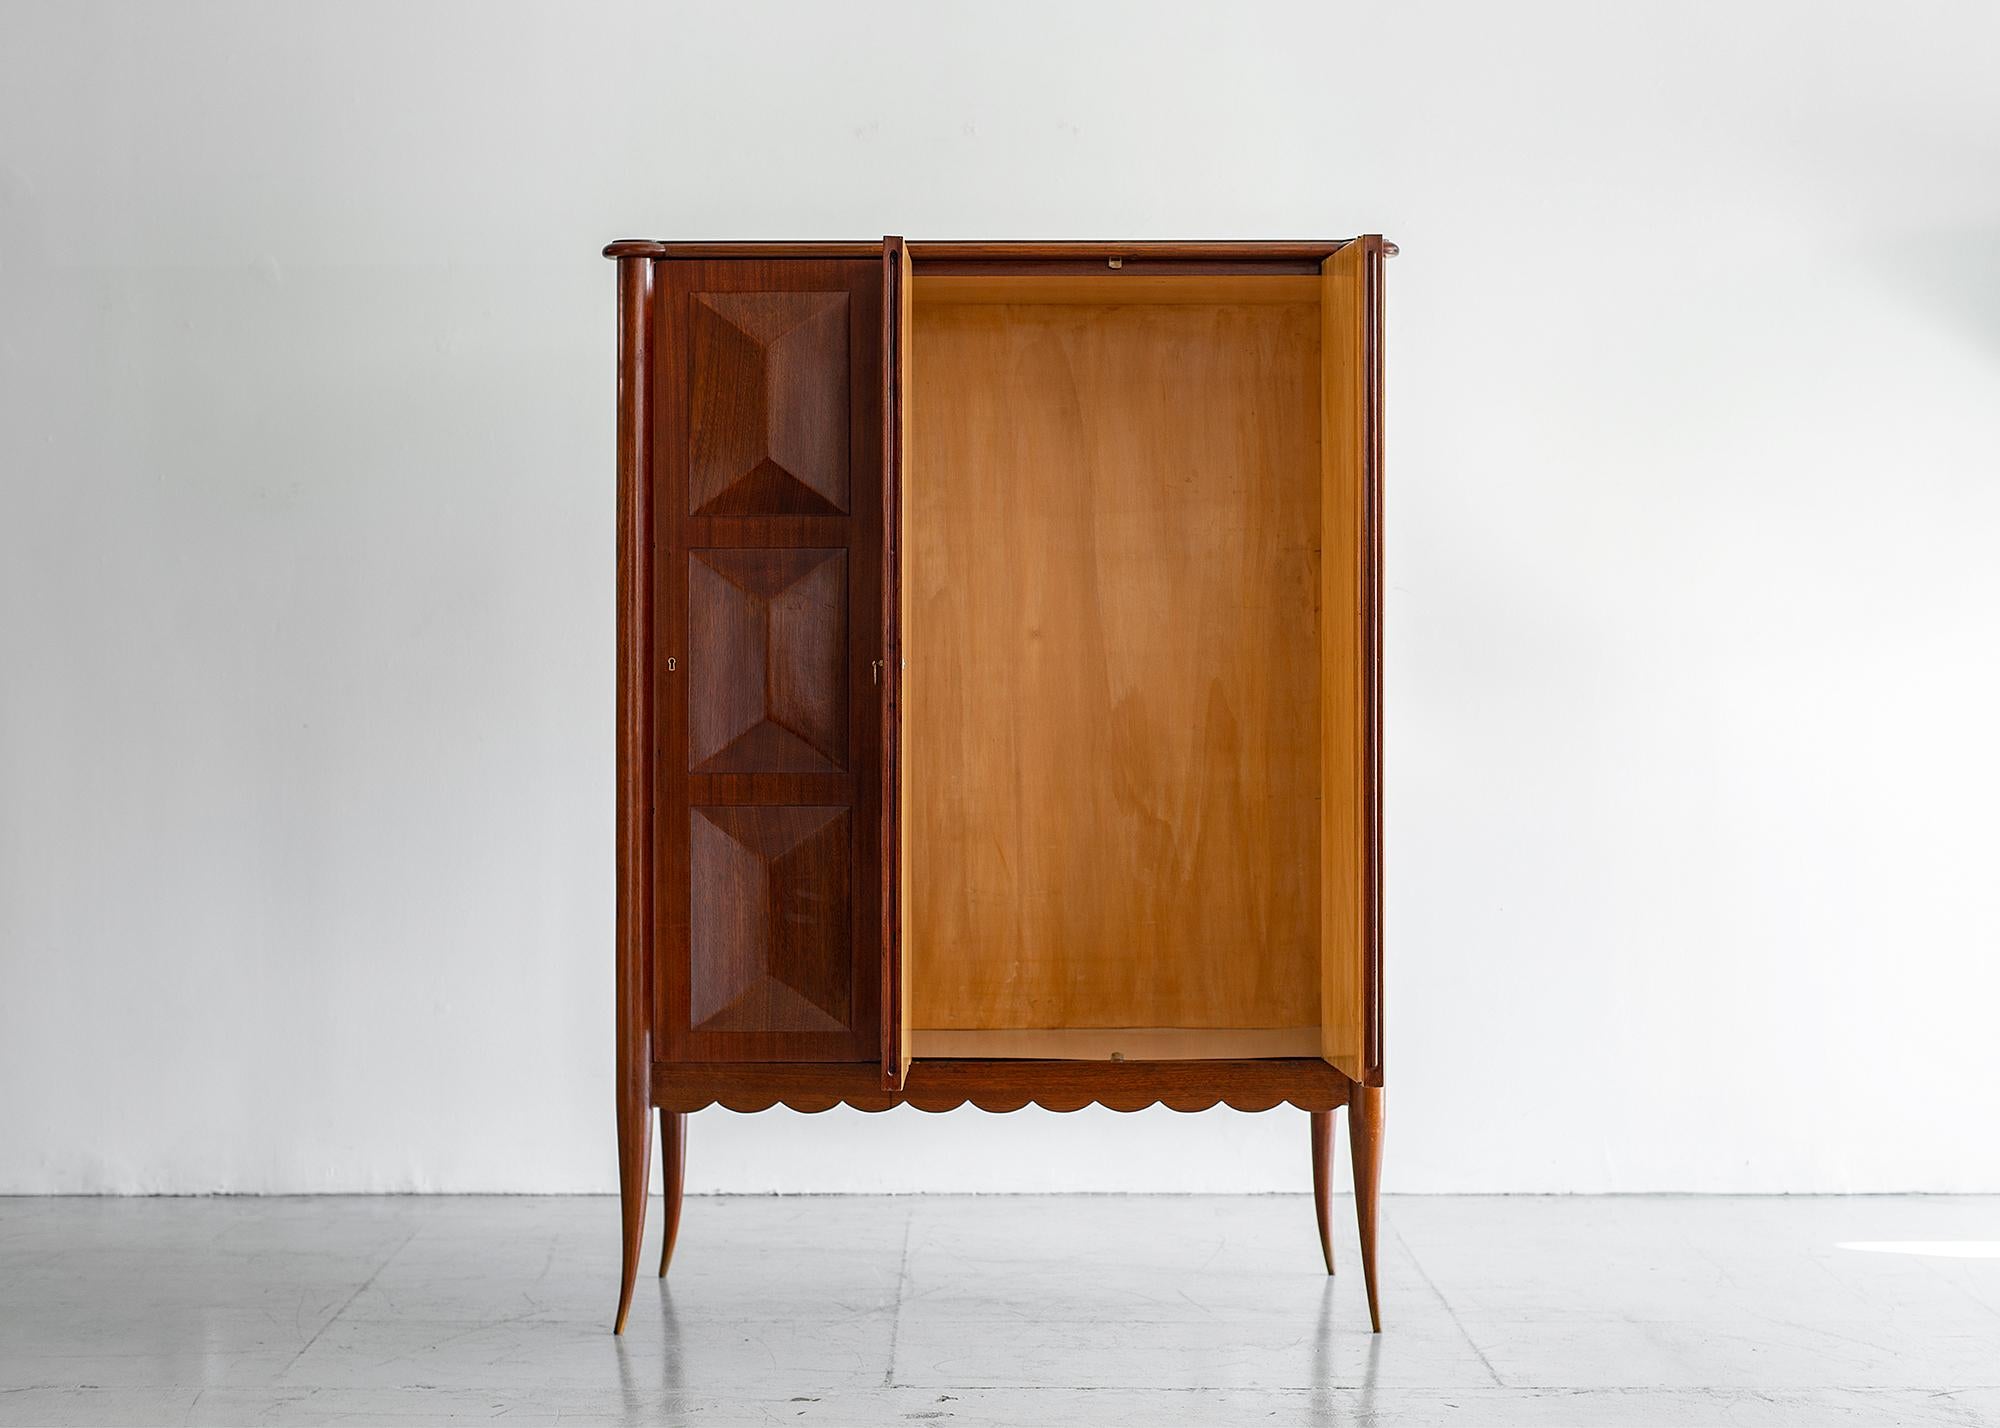 Gorgeous Paolo Buffa cabinet, circa 1940s.
Rare 1940s cabinet with scalloped edge detail and horn legs.
Cabinet opens with 2 doors -revealing beautiful wood inside.
Shelves can be any height.
Mahogany wood with original finish.